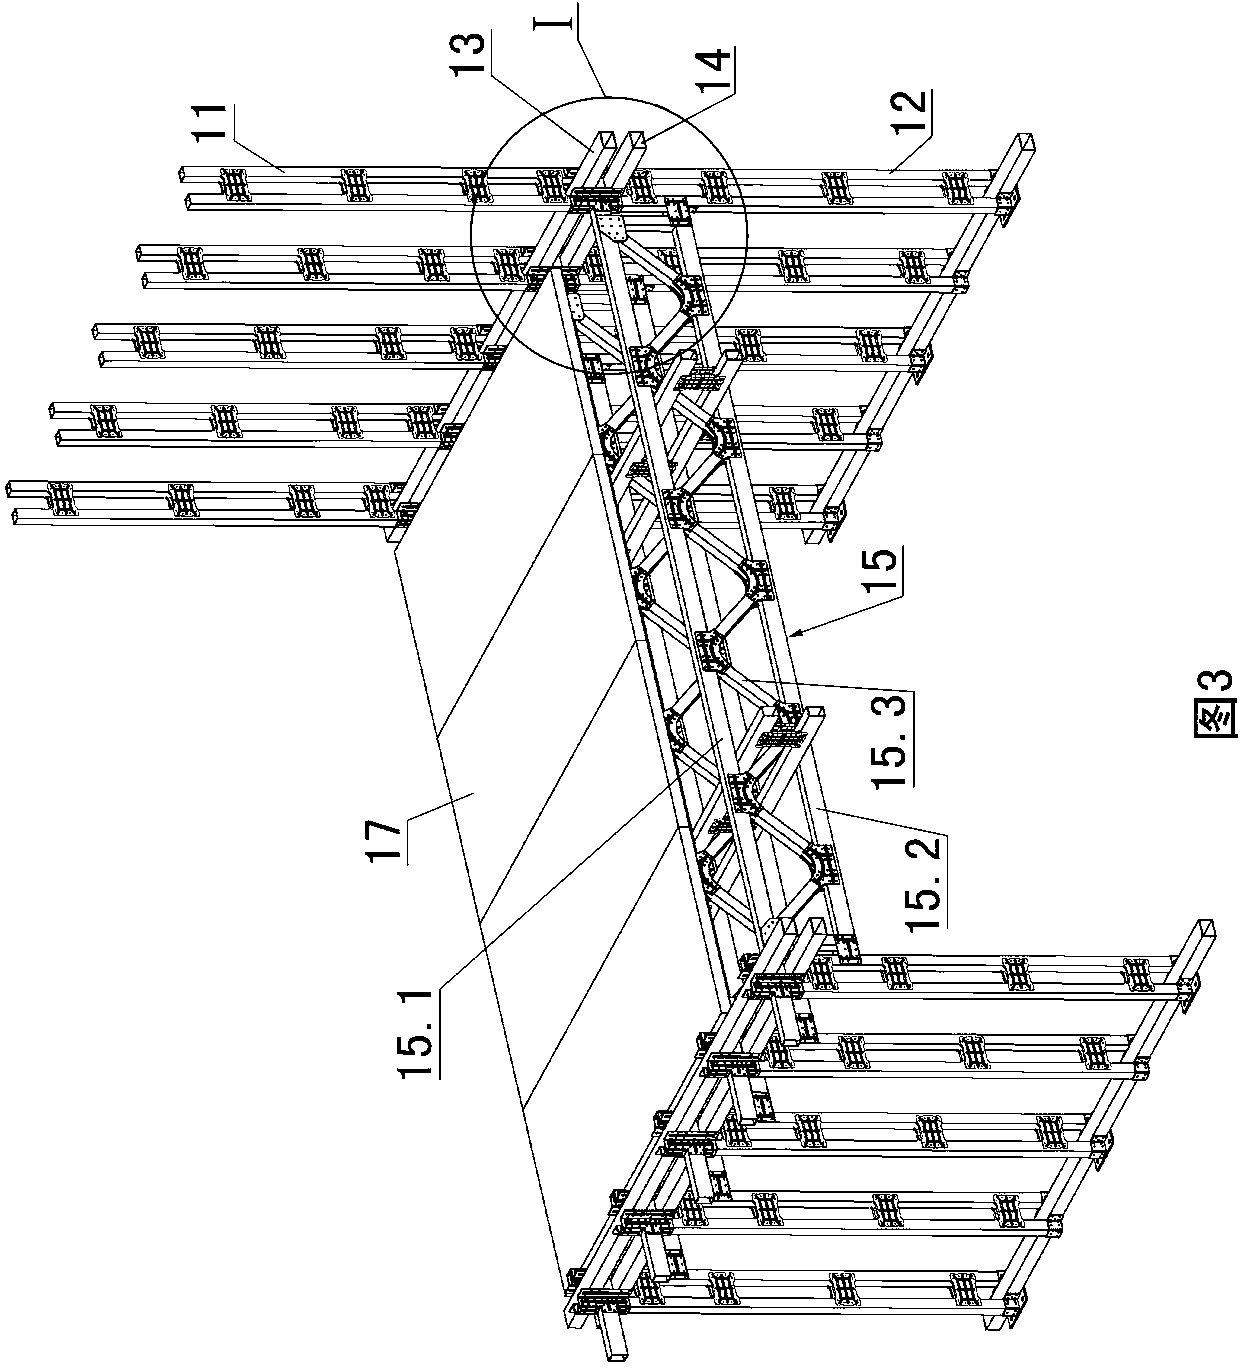 Beam-passing fastener and lightweight steel construction for connecting upper layer and lower layer